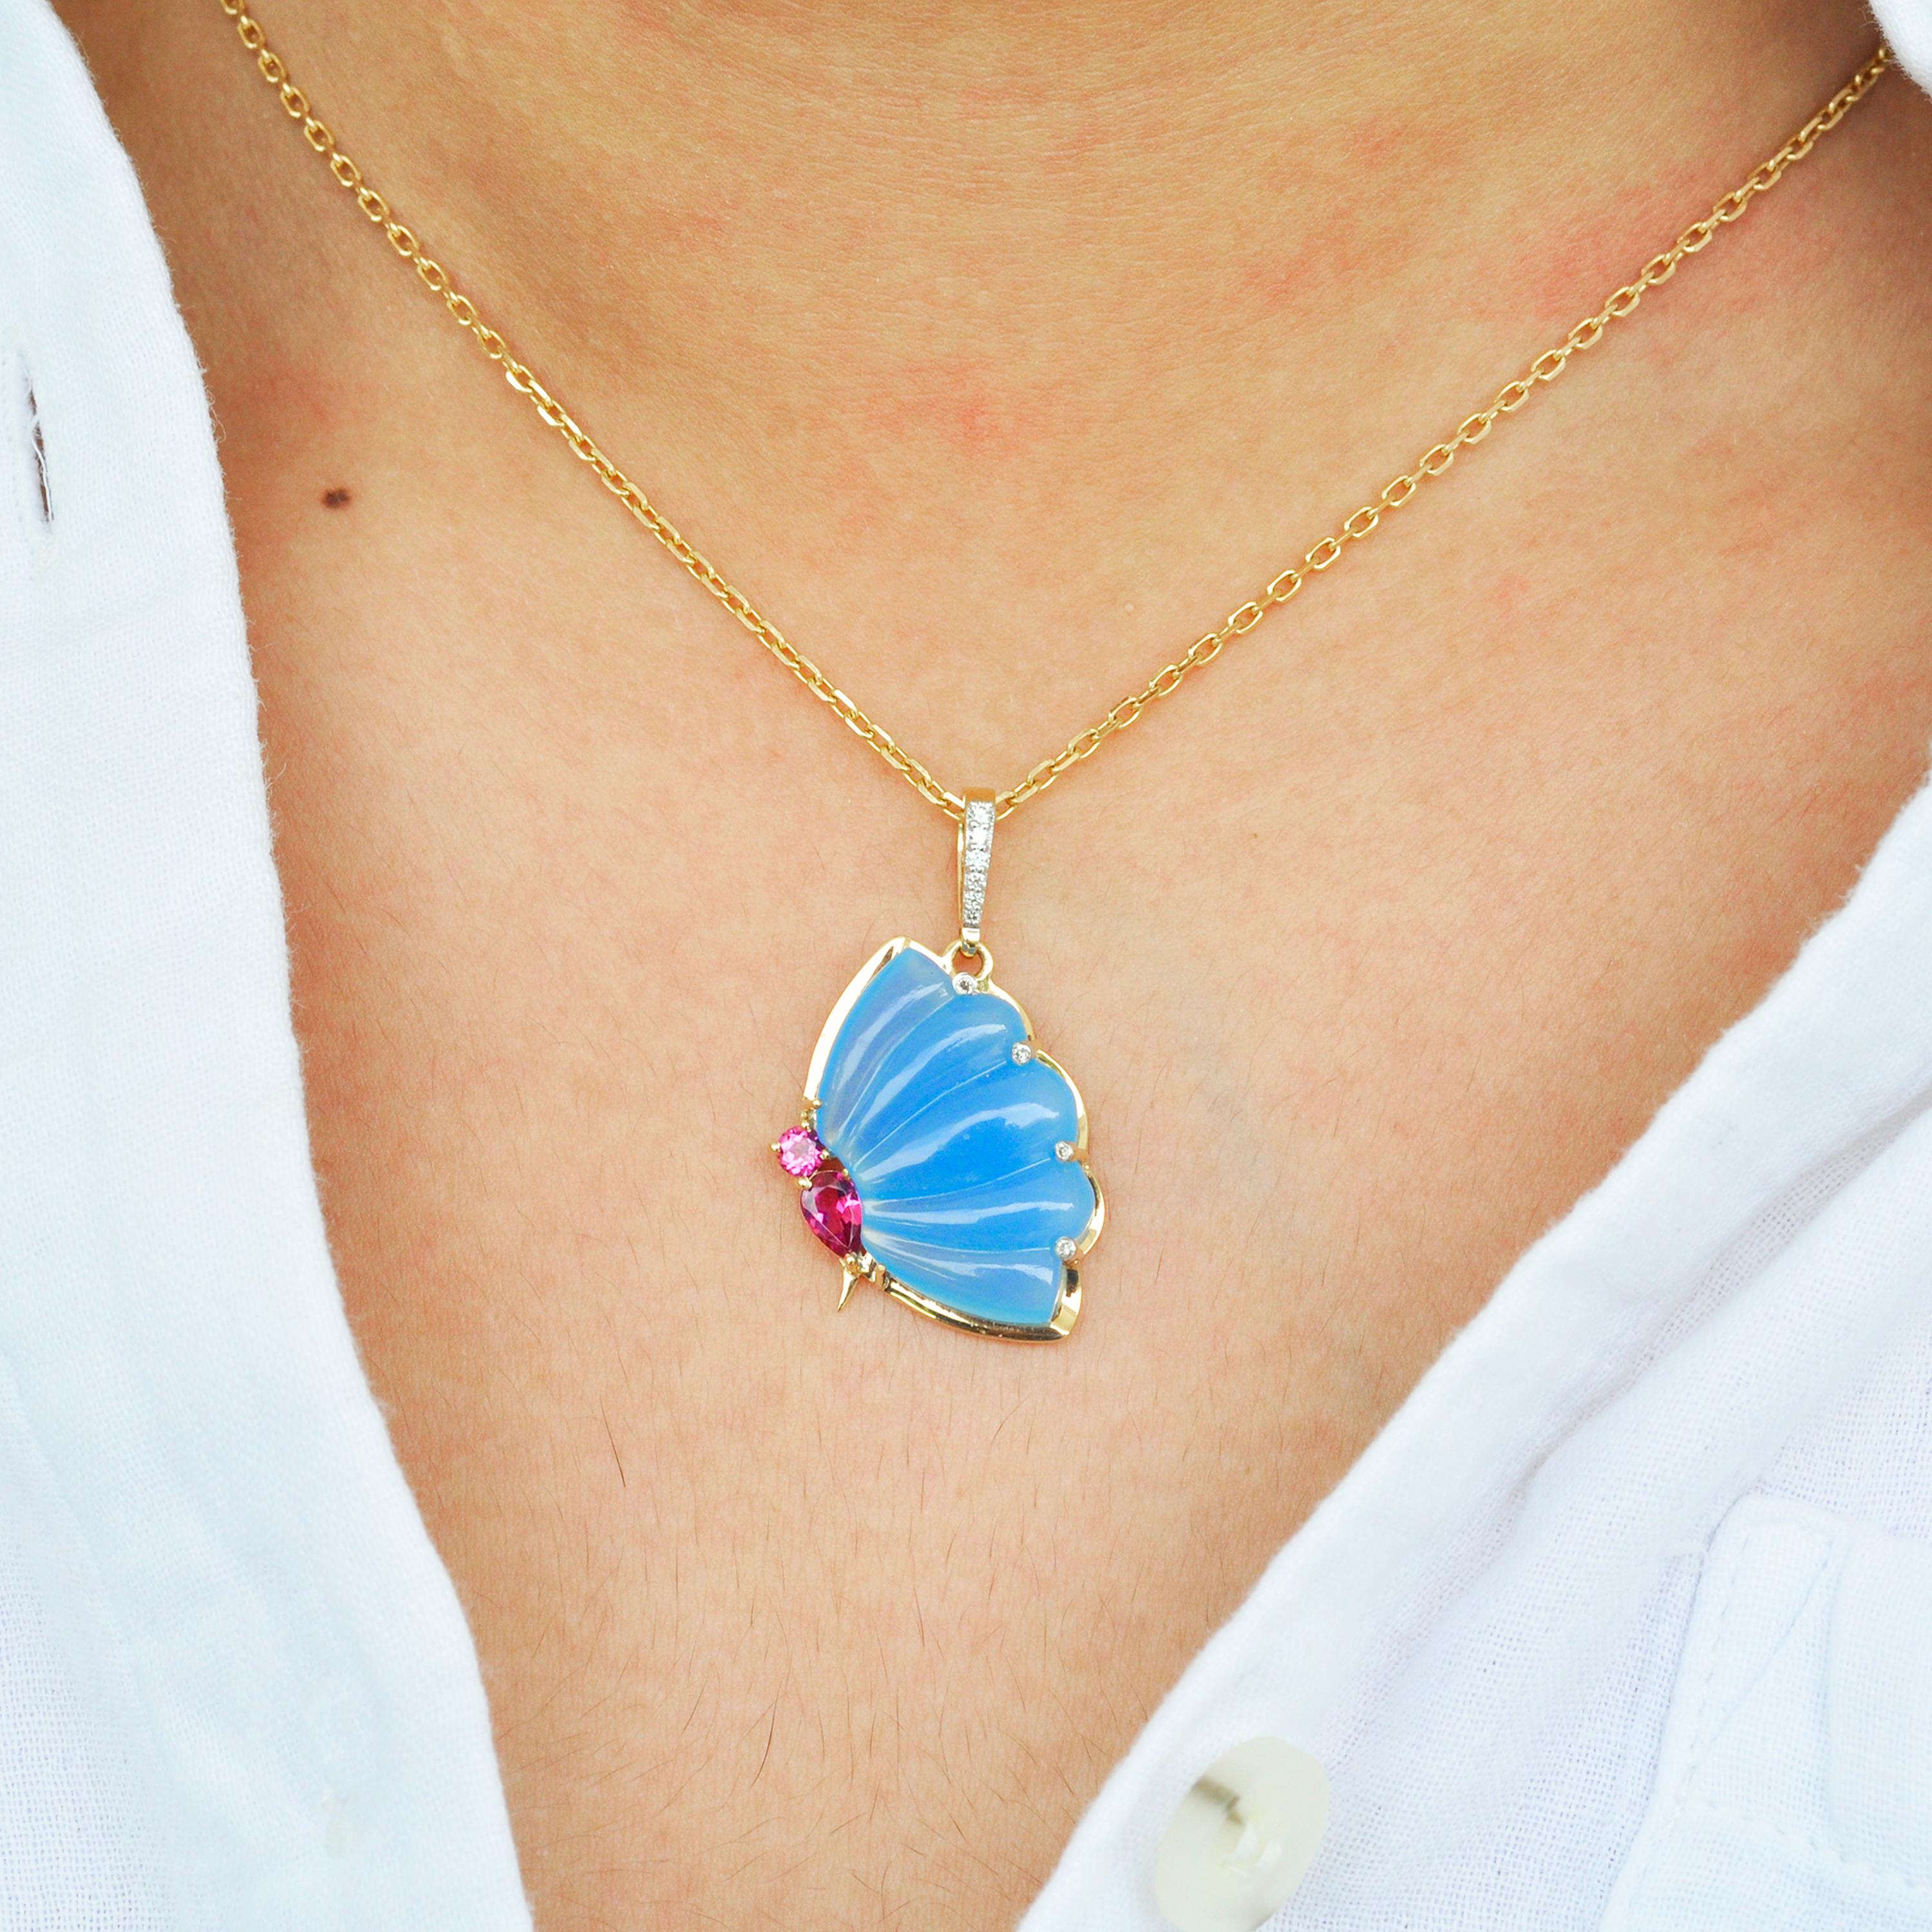 18 karat gold pink tourmaline blue chalcedony butterfly carving diamond pendant necklace

This elegant and chic butterfly pendant is so beautiful and contemporary. The blue chalcedony is carved with subtle curves and lines to form a wing of a